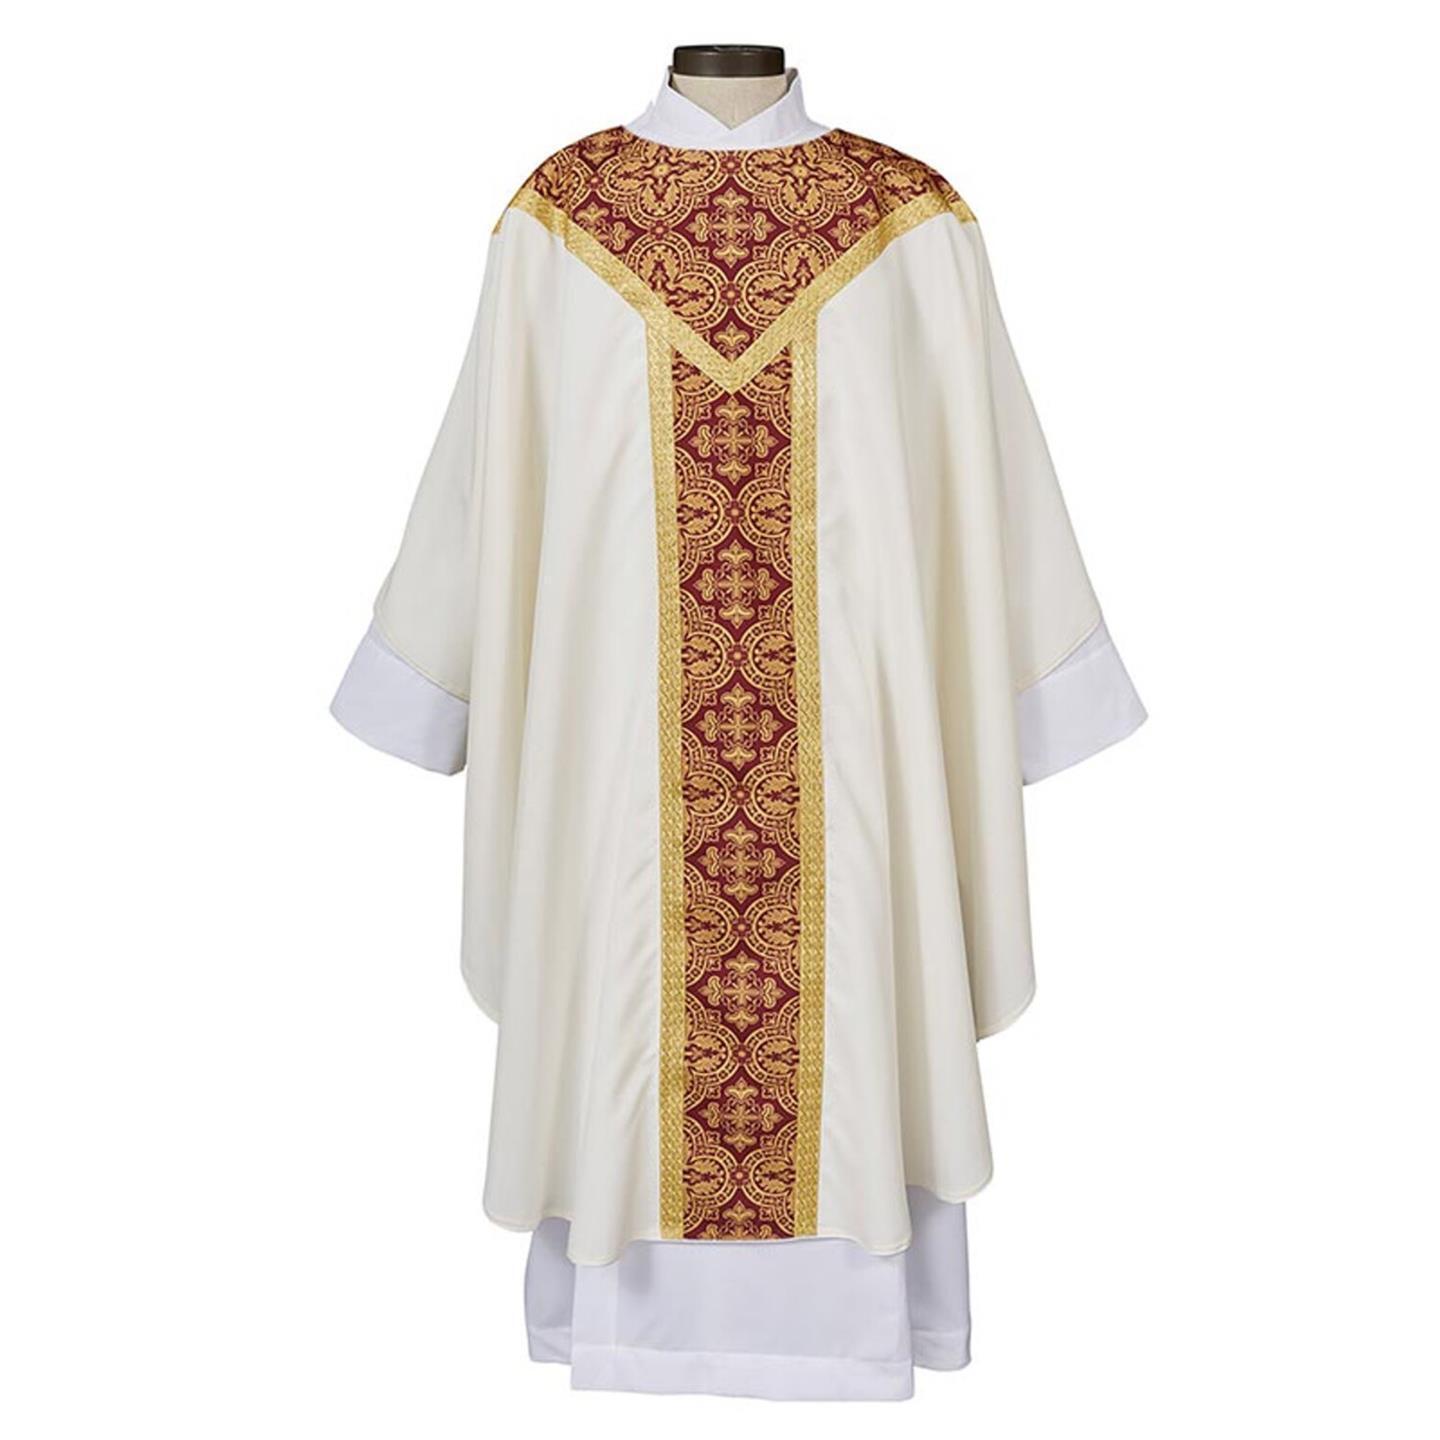 Printed Gothic OFF-white Chasuble Polyester with Gold Lace Trim Size:59 x 51